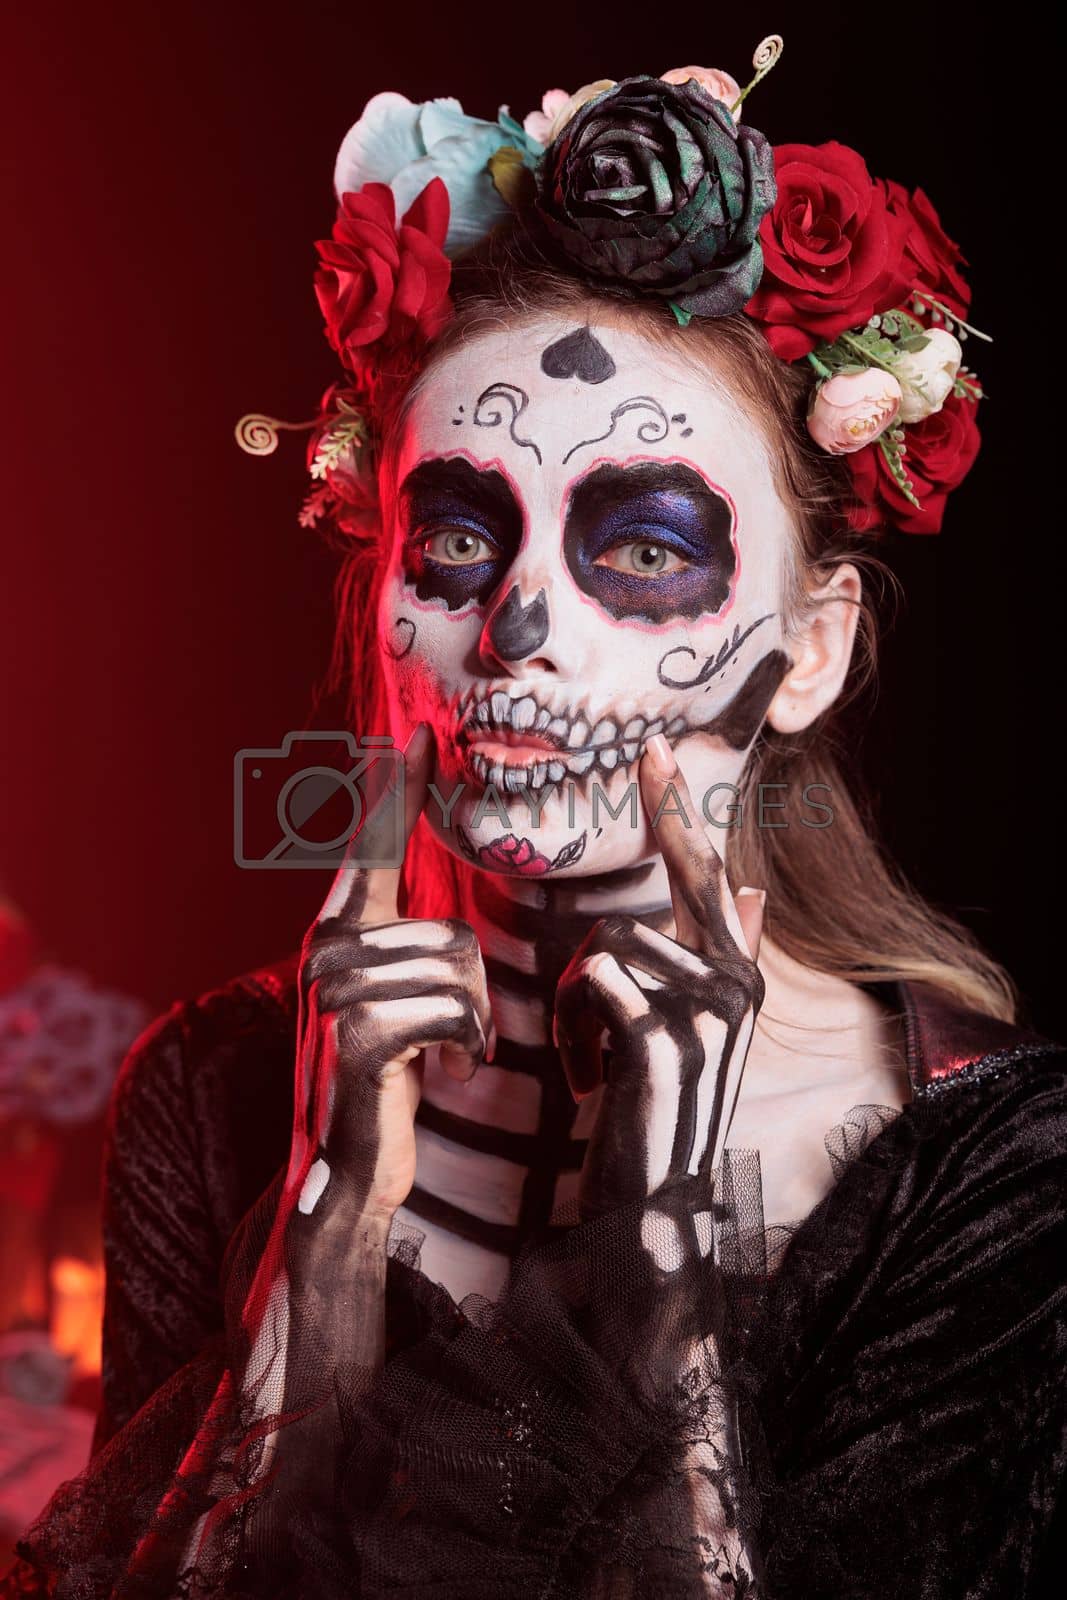 Royalty free image of Spooky lady of death doing flirty kissy face by DCStudio